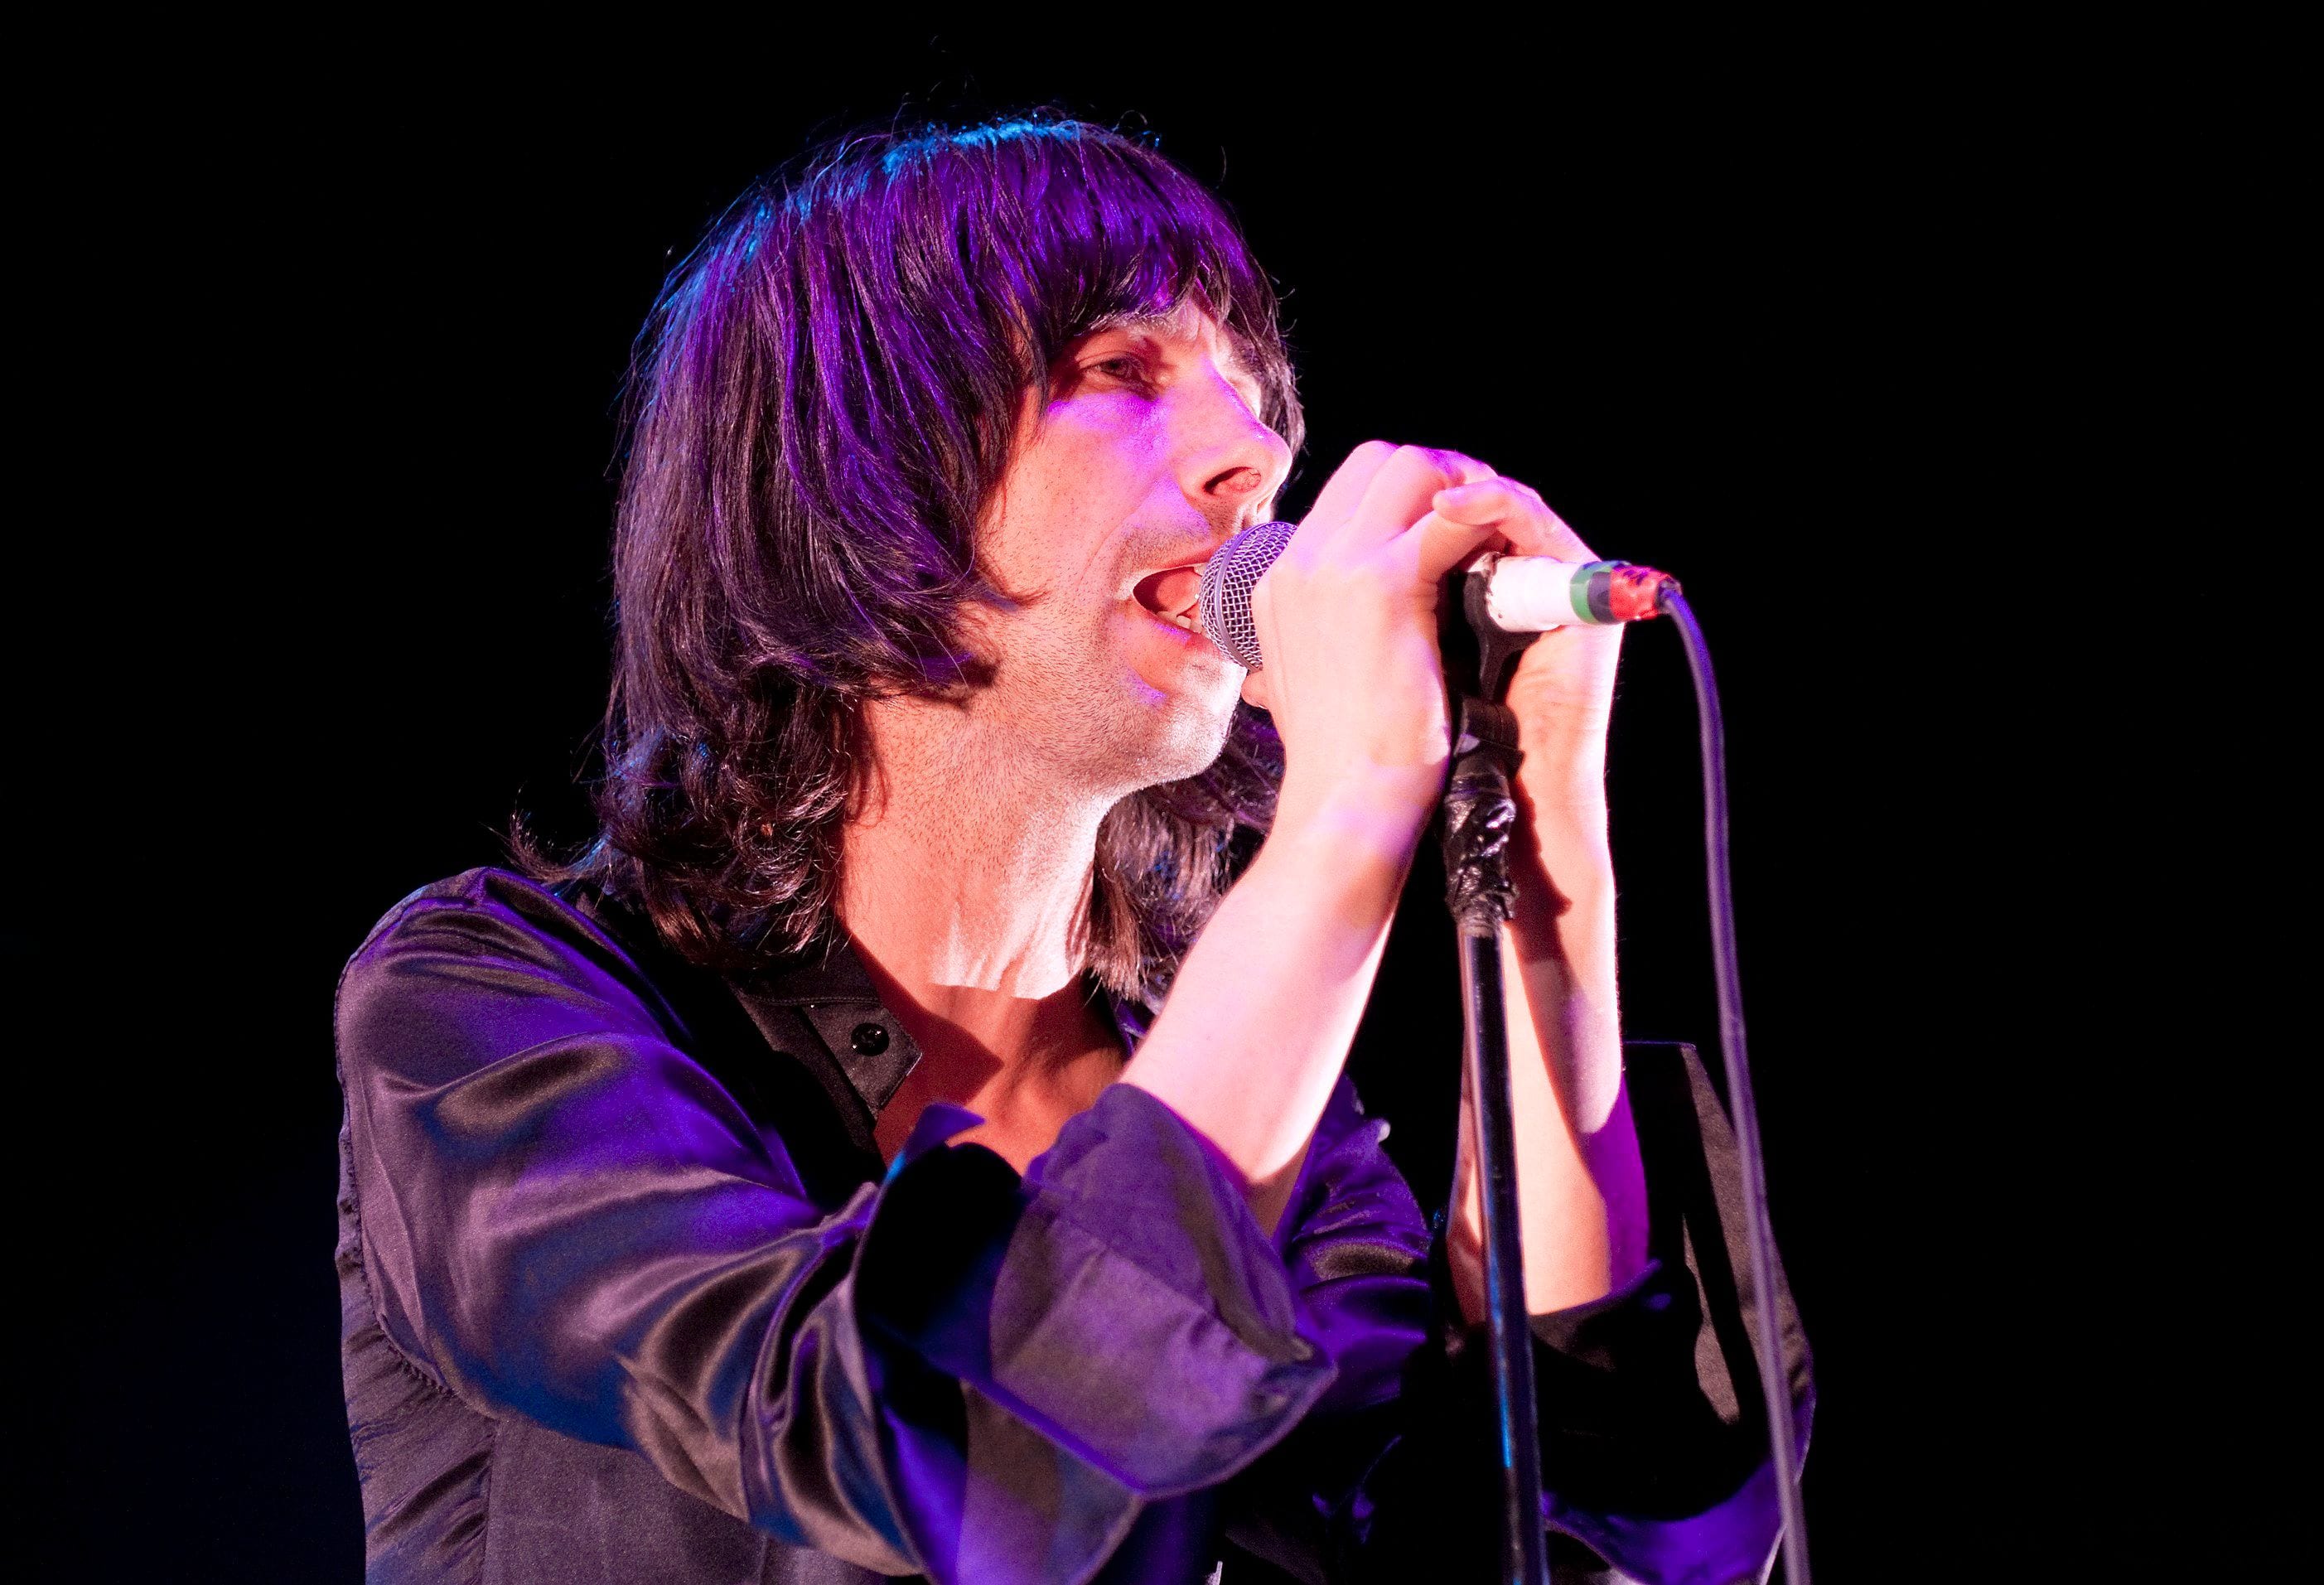 Primal Scream’s ‘Screamadelica’ and the Altered State